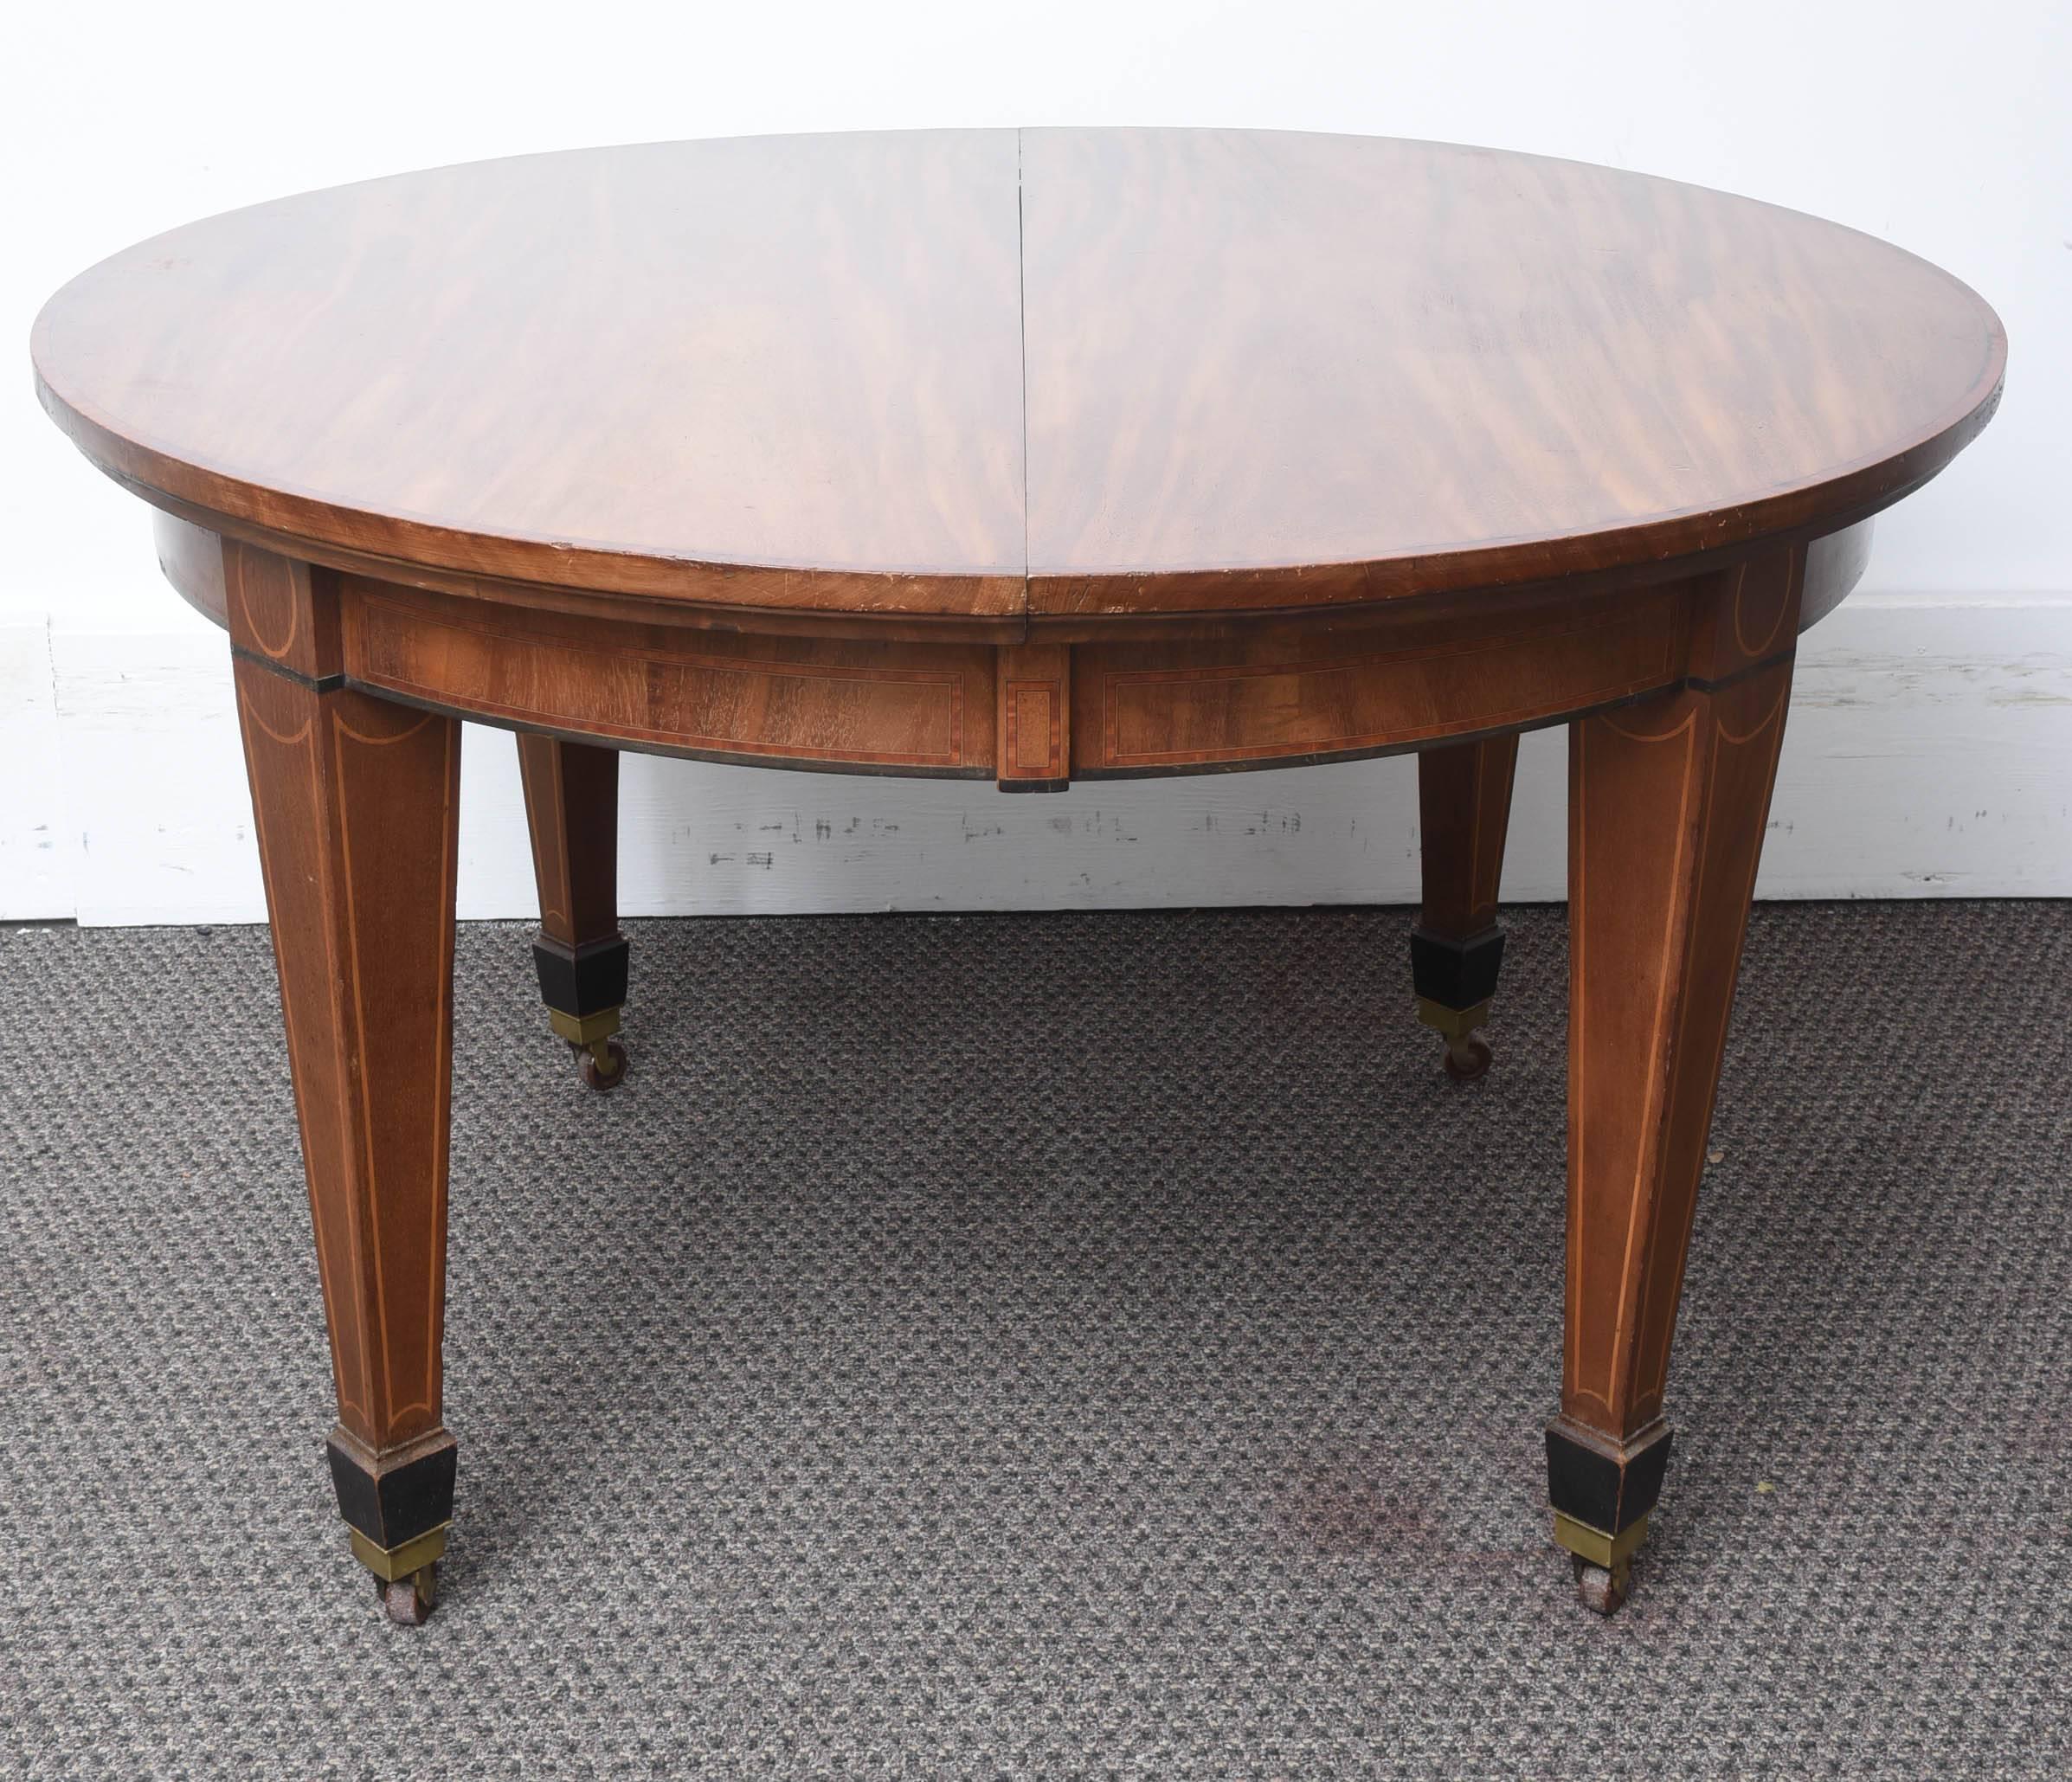 This is a superb mahogany dining table with two original leafs.
It sits on square tapered legs with satinwood inlay down the sides; to the bottom it has the original castors. Thee top is a flamed mahogany in a light color, the edges has satinwood